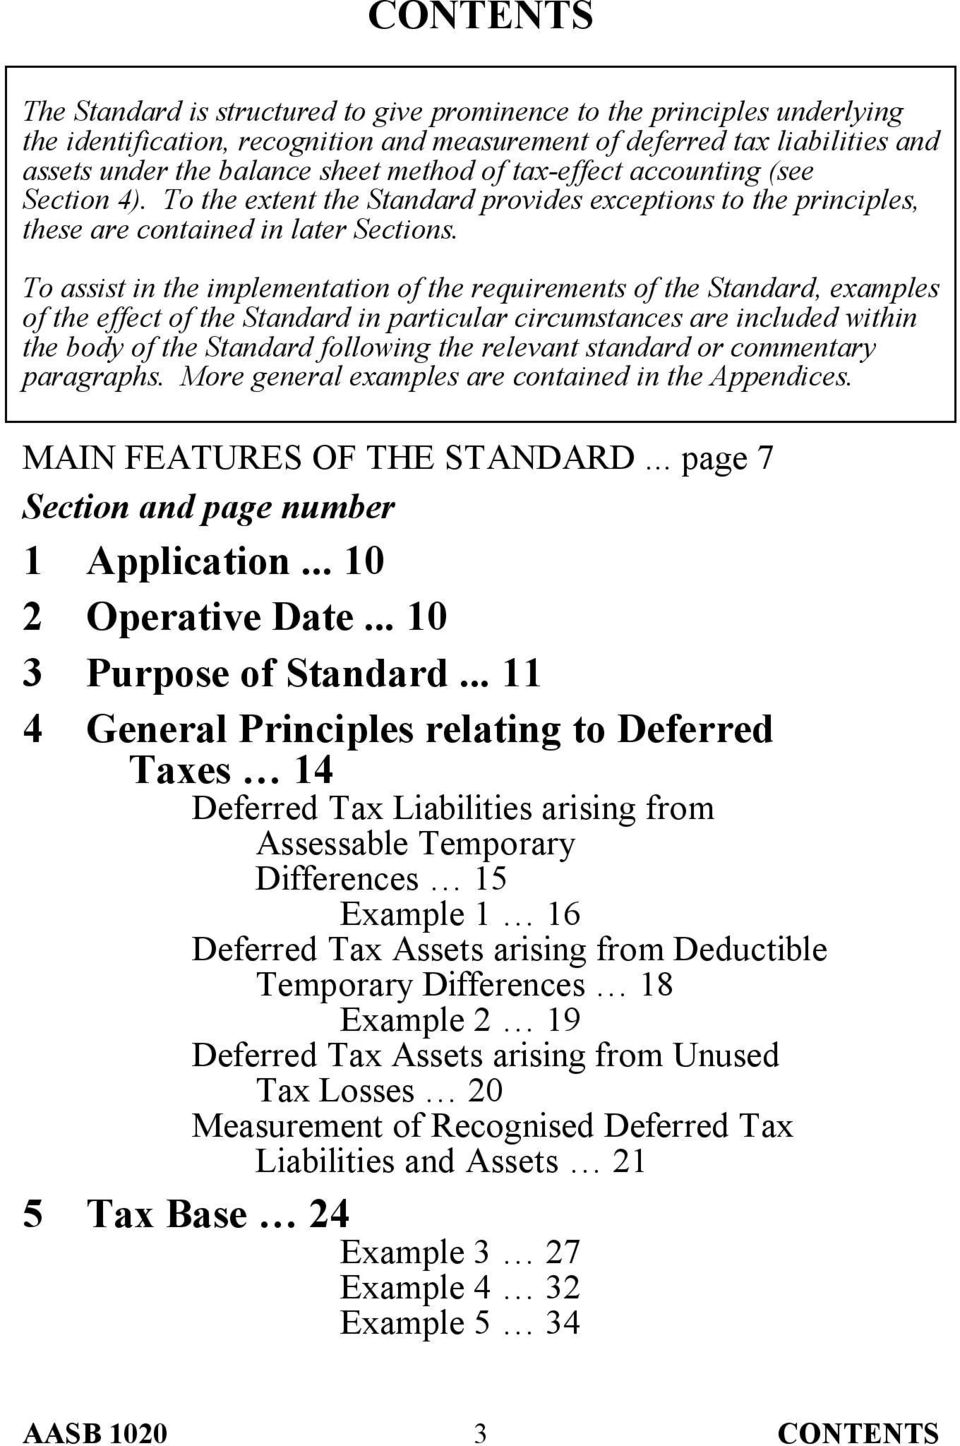 To assist in the implementation of the requirements of the Standard, examples of the effect of the Standard in particular circumstances are included within the body of the Standard following the